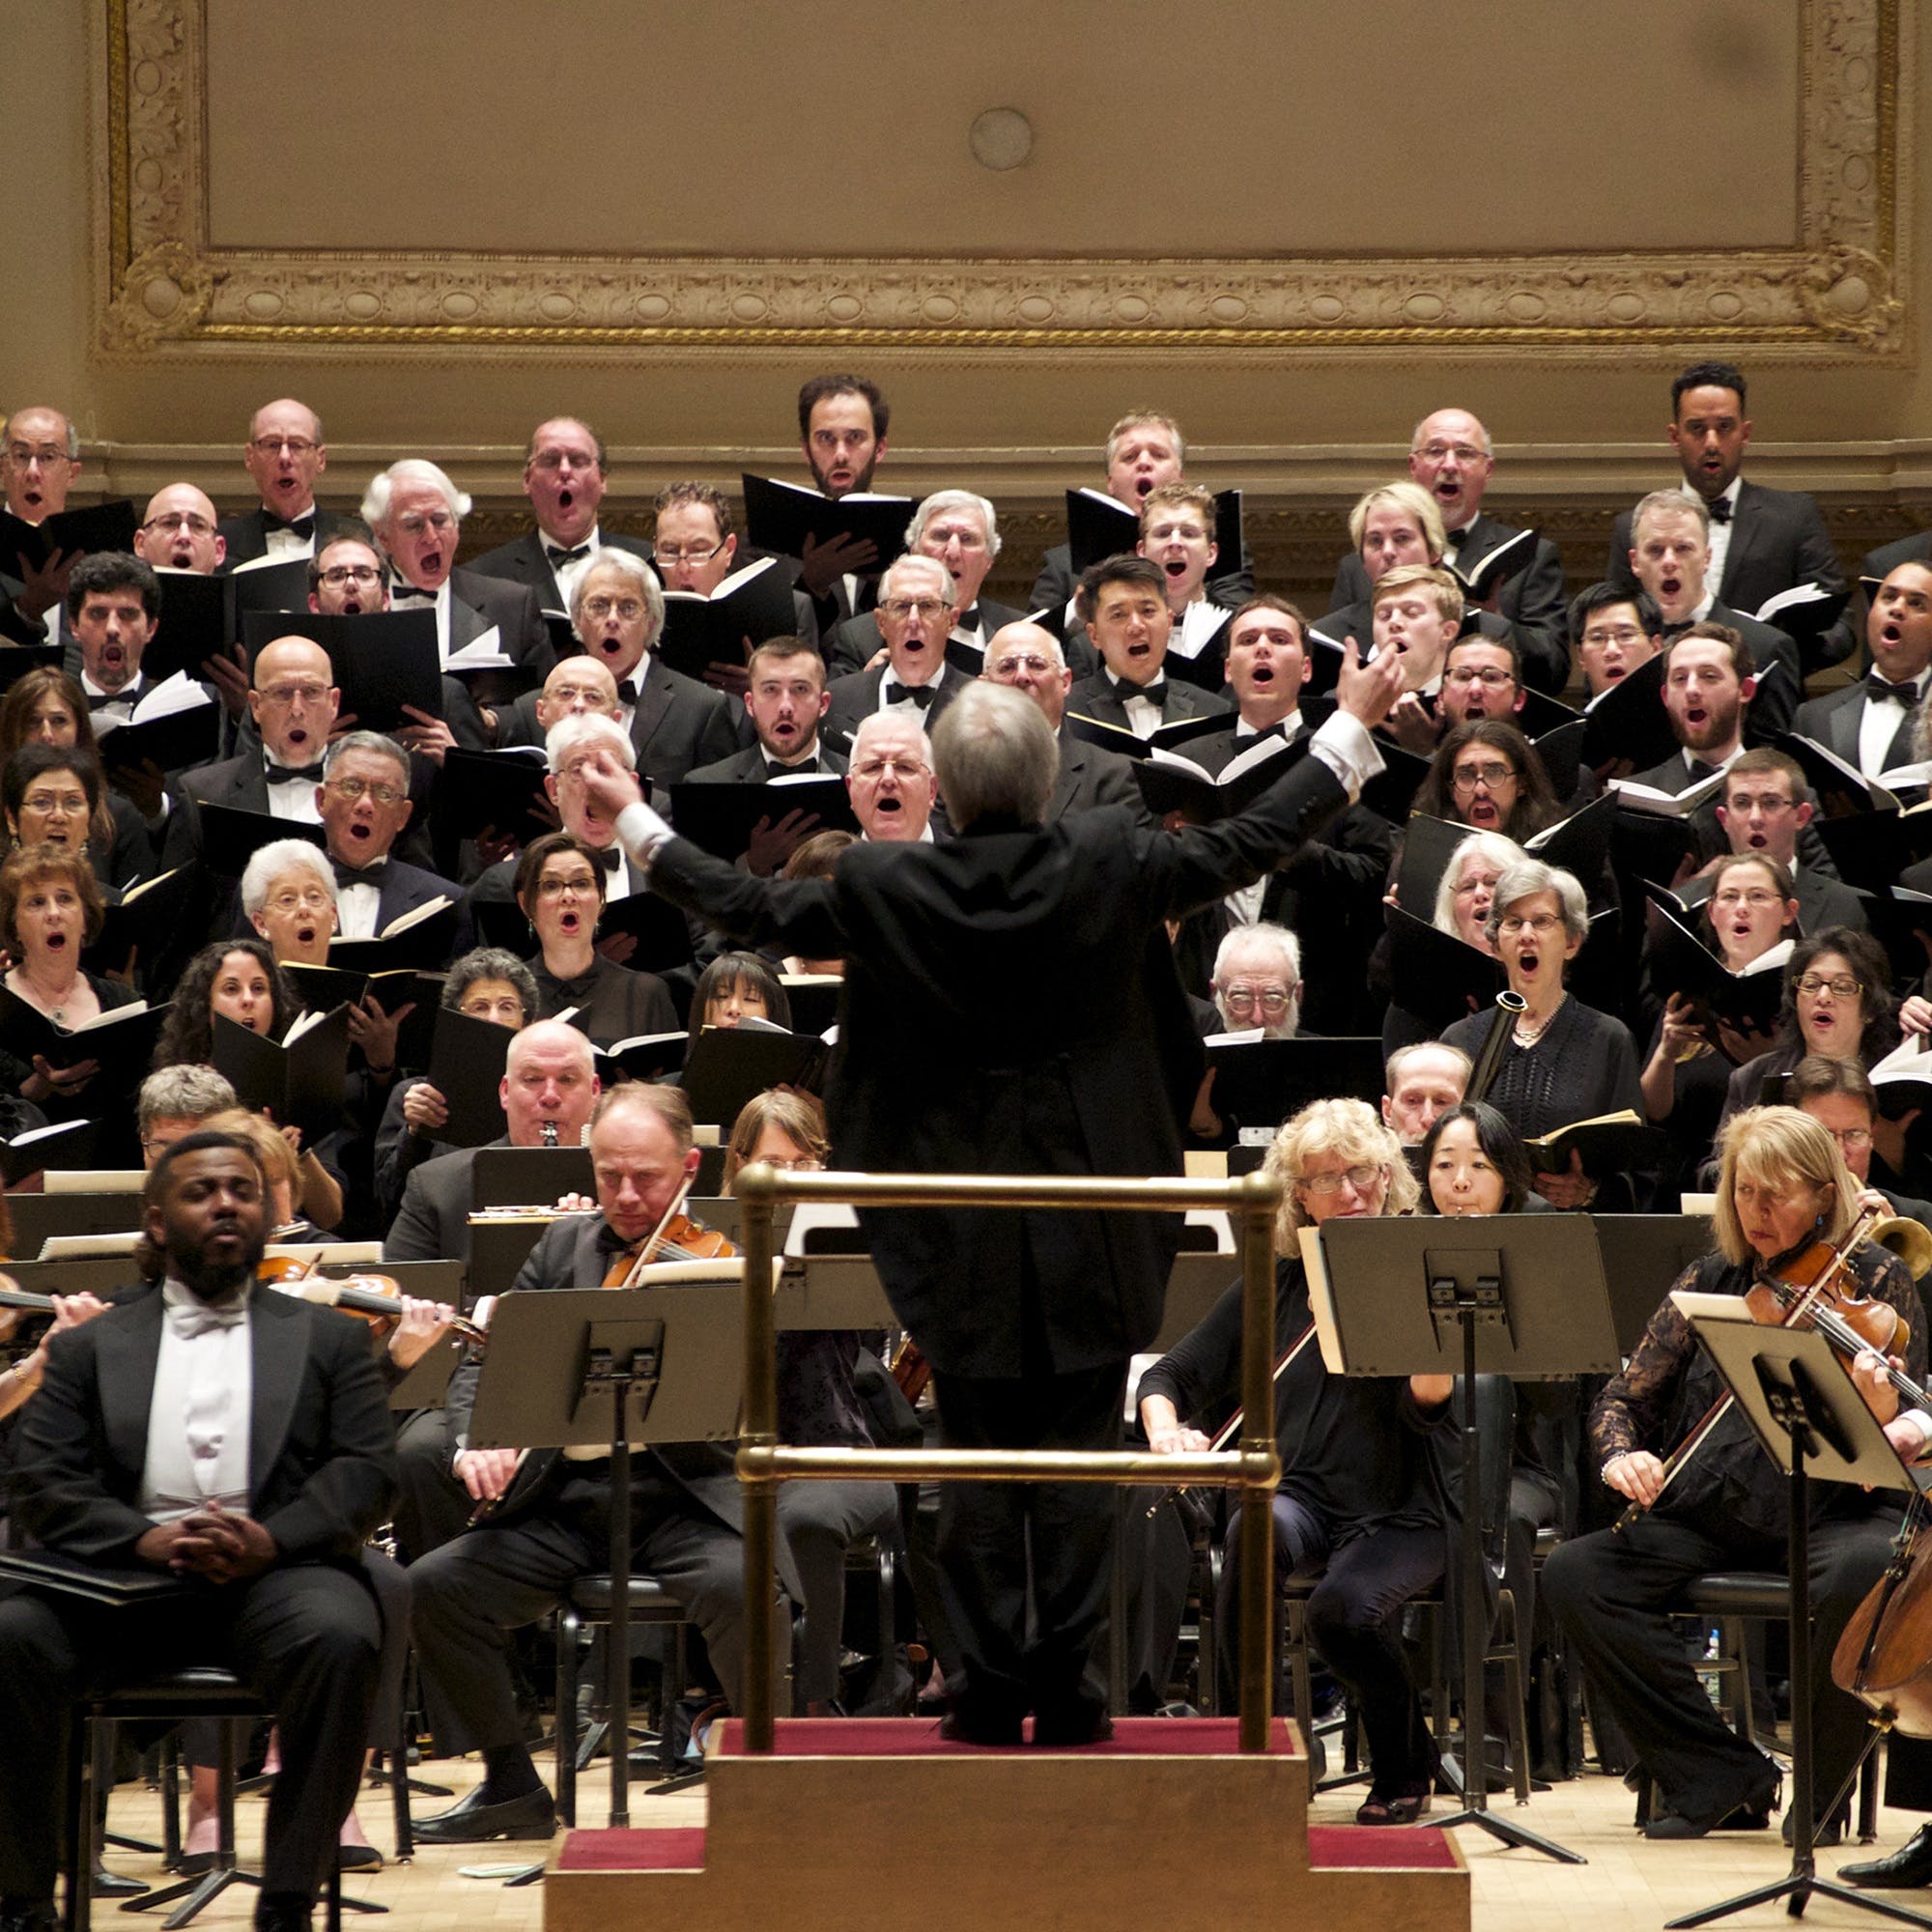 The Cecilia Chorus of New York with Orchestra at Isaac Stern Auditorium